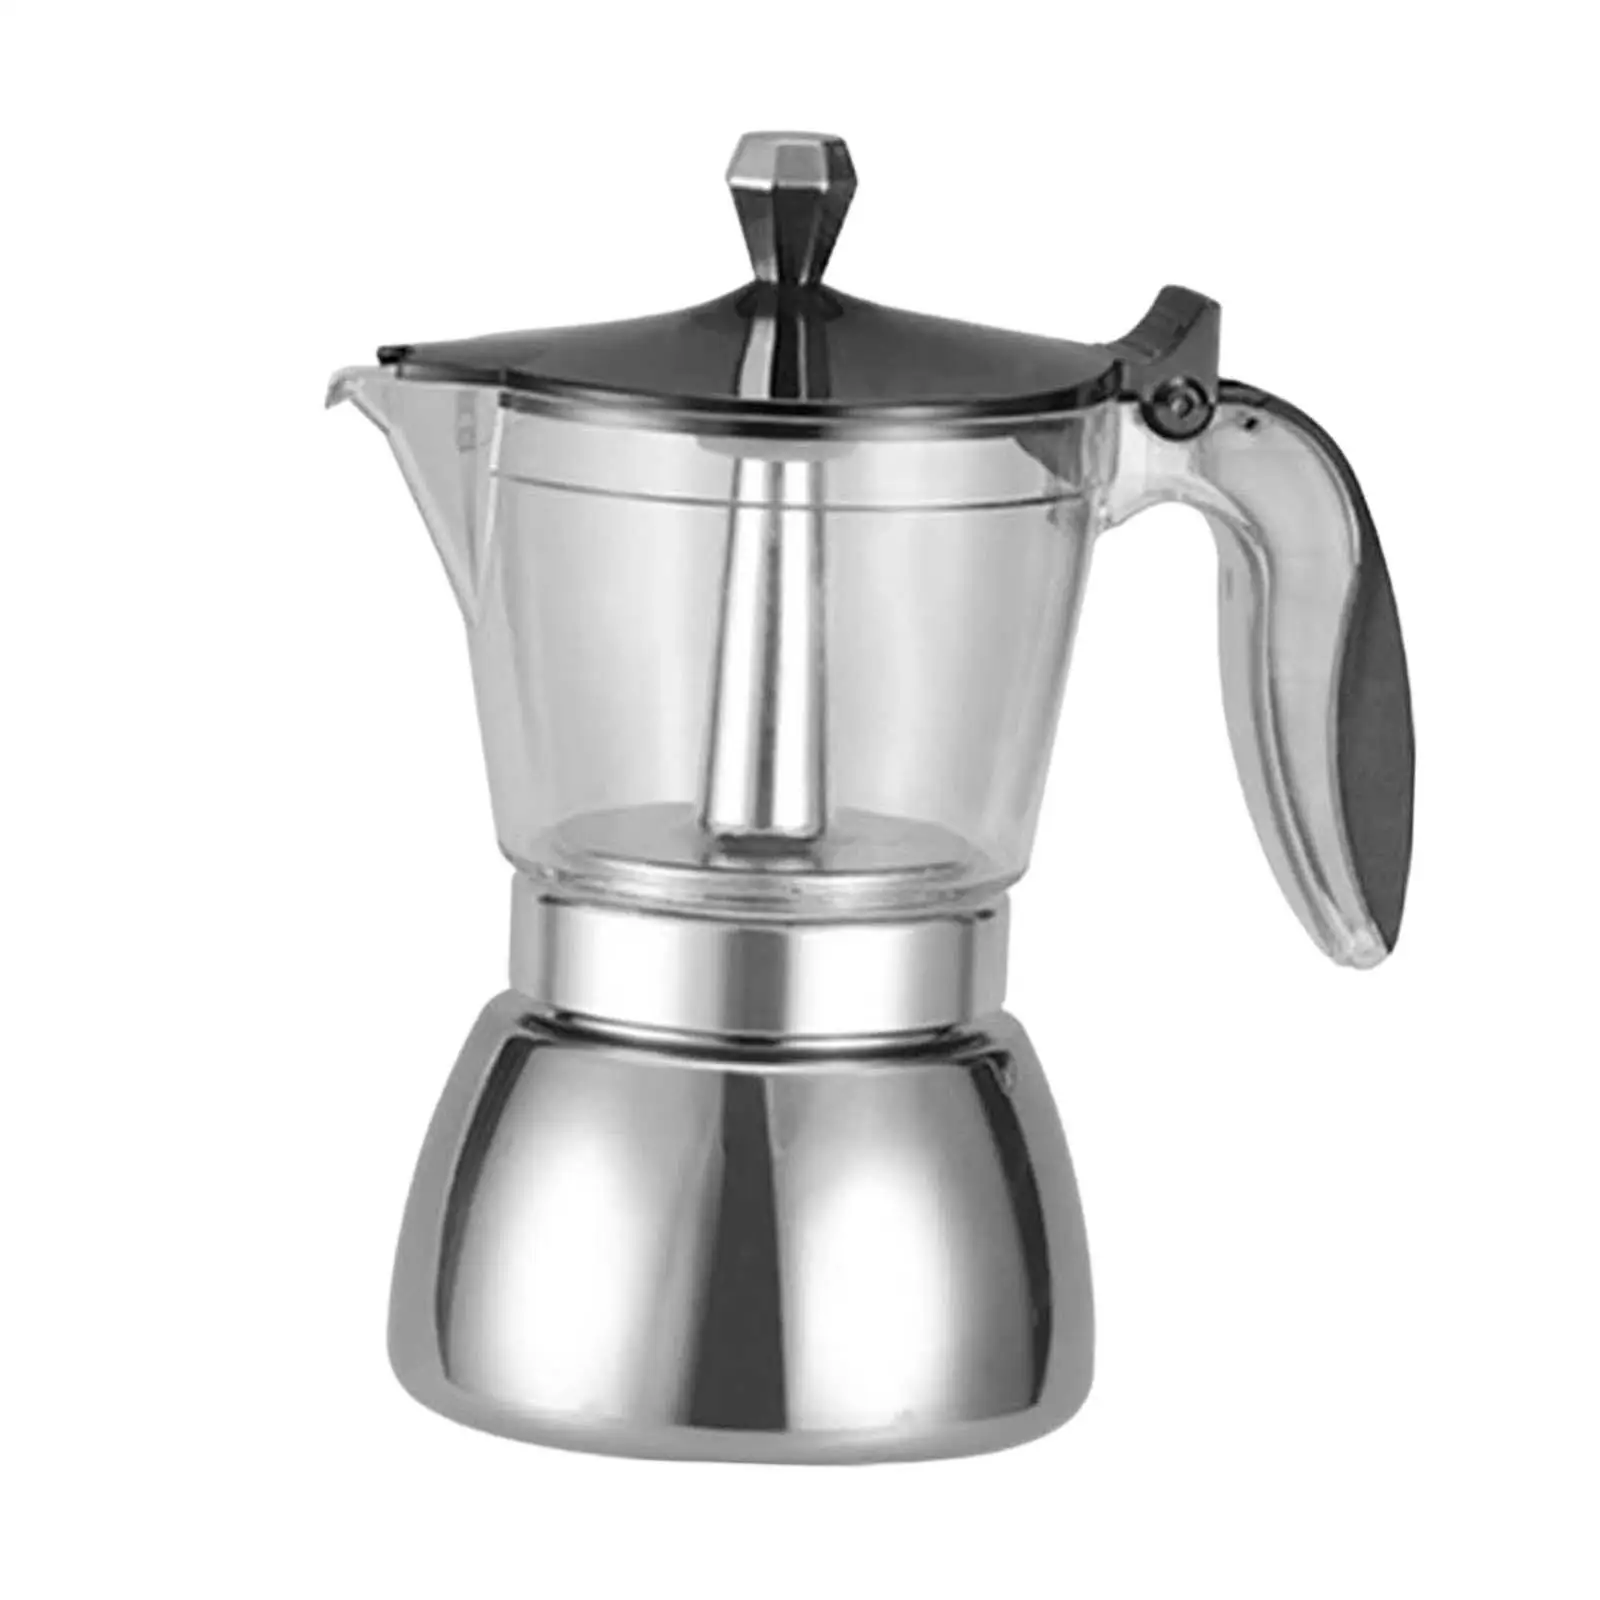 Moka Pot Anti Scald Handle Italian Style Stainless Steel Stovetop Espresso Pot for Barista Accessory Outdoor Camping Home